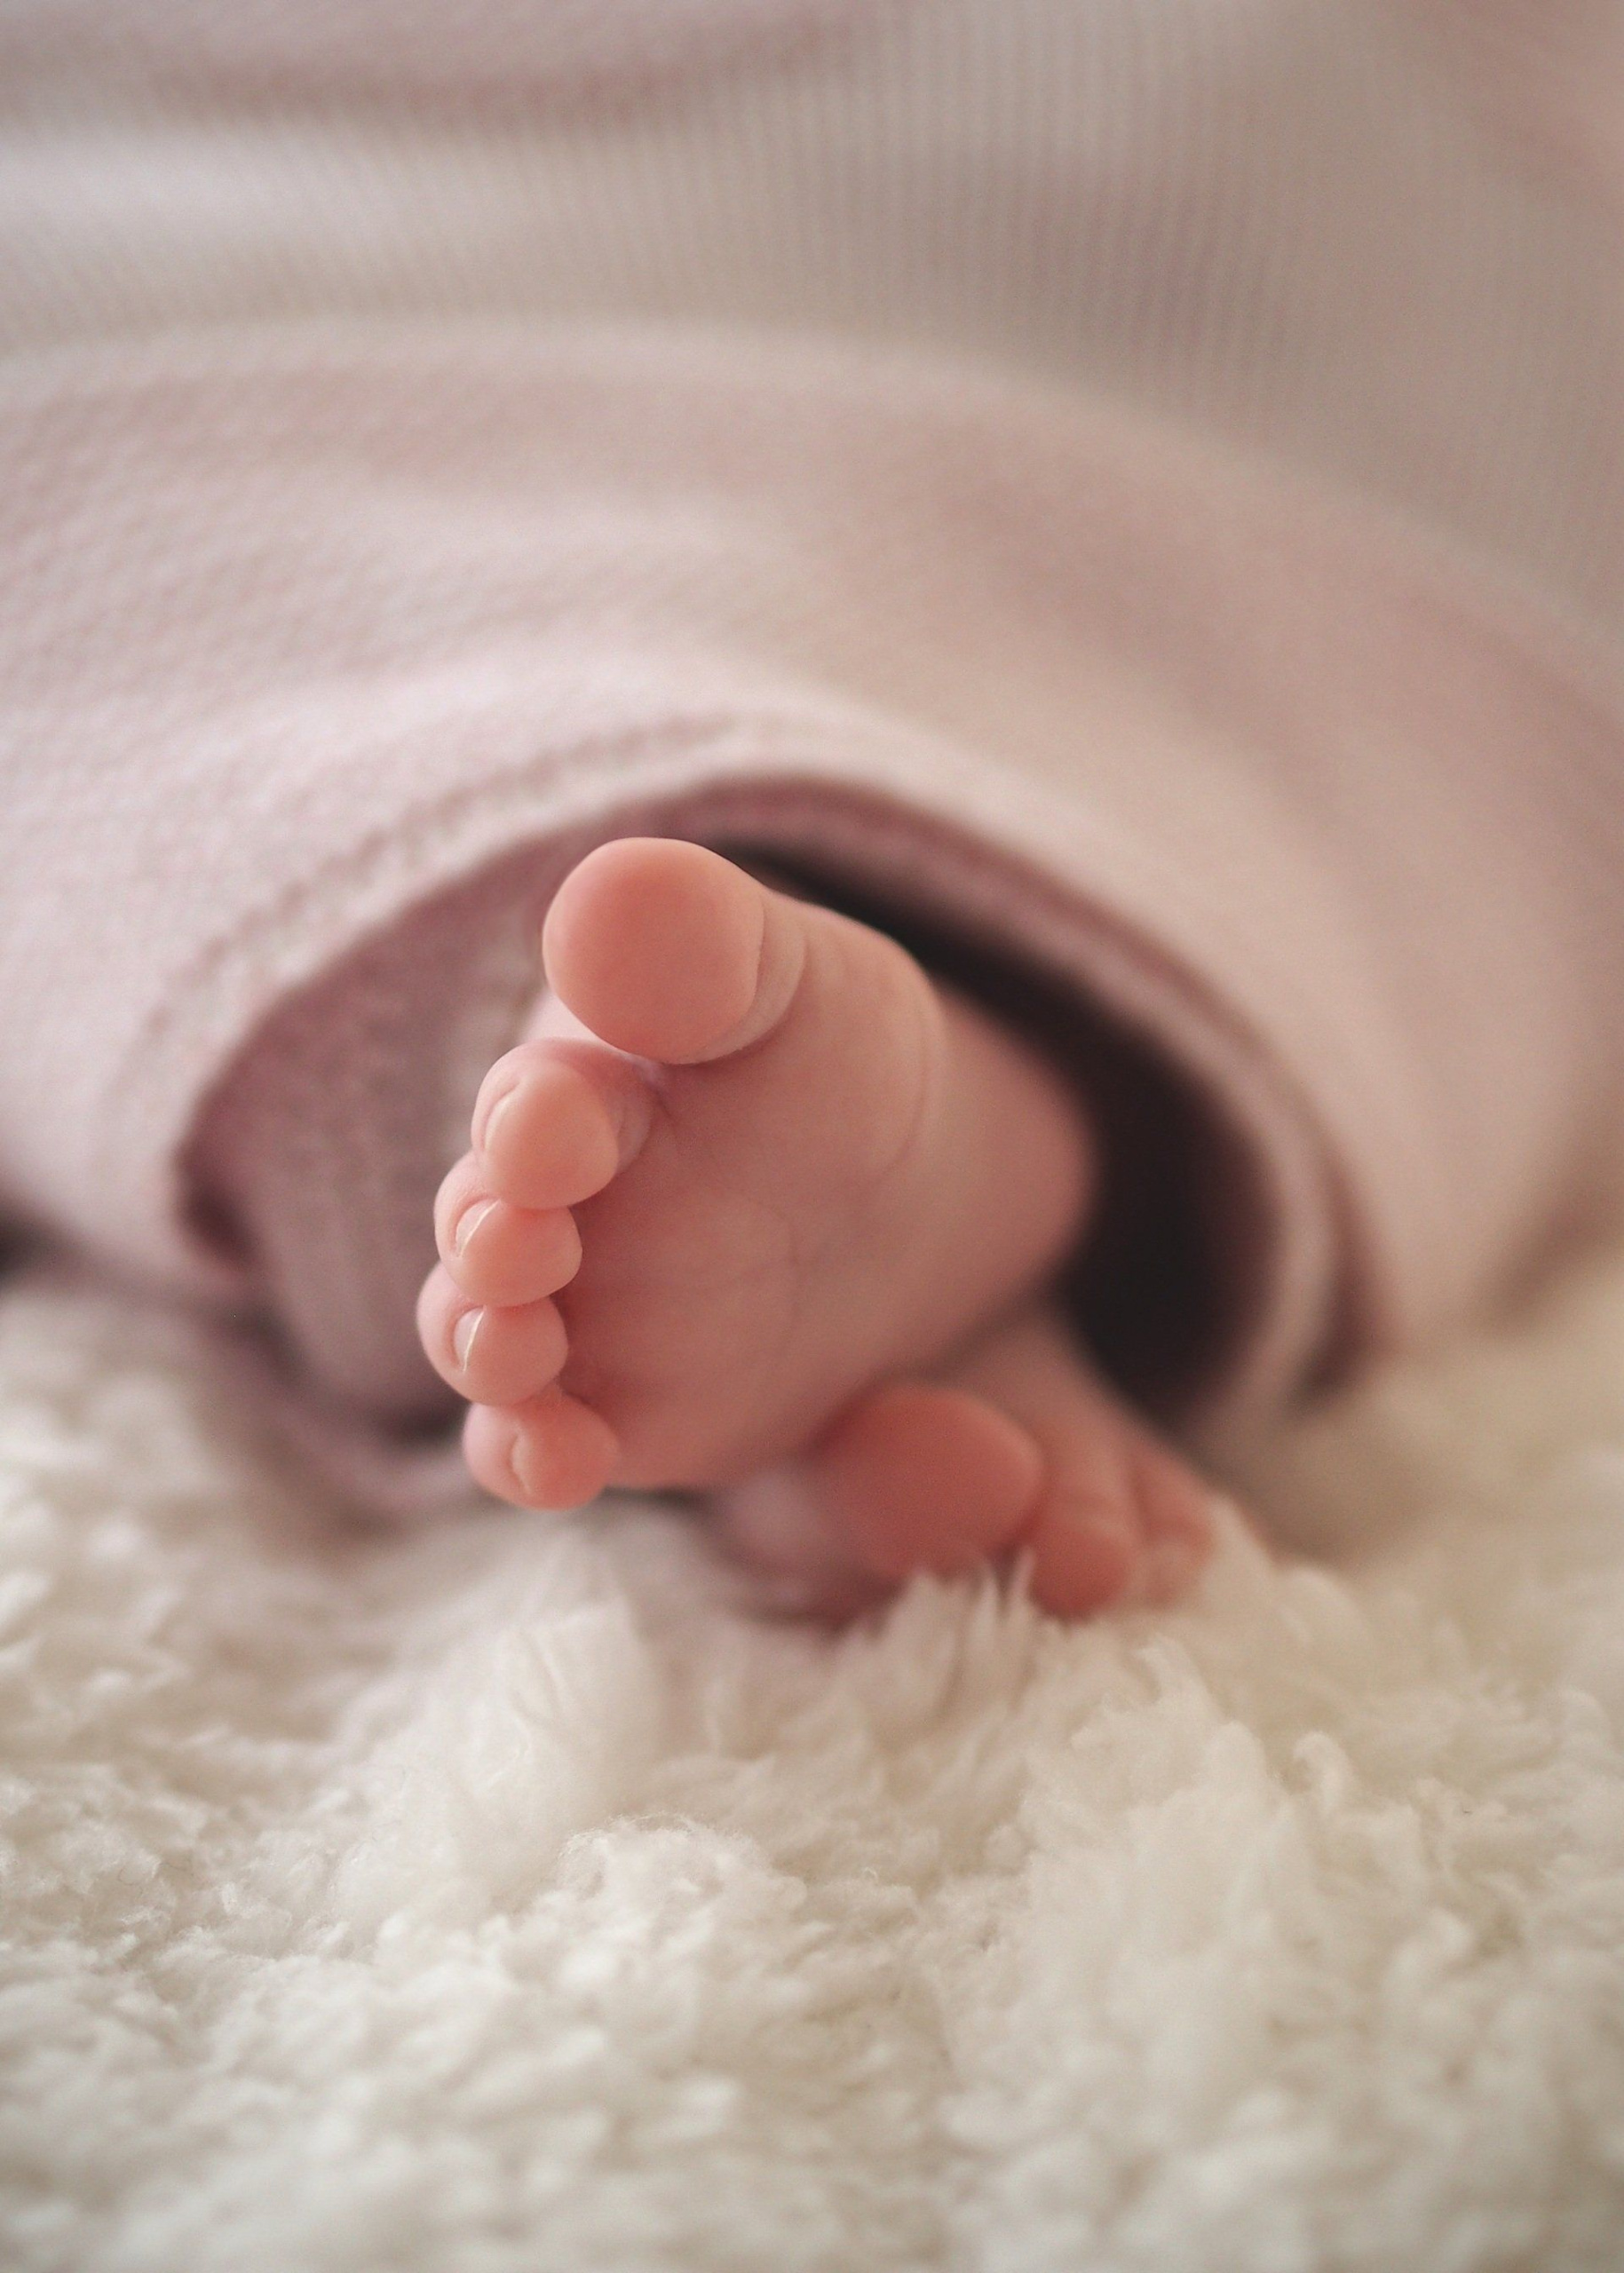 Baby feet sticking out of a warm blanket.